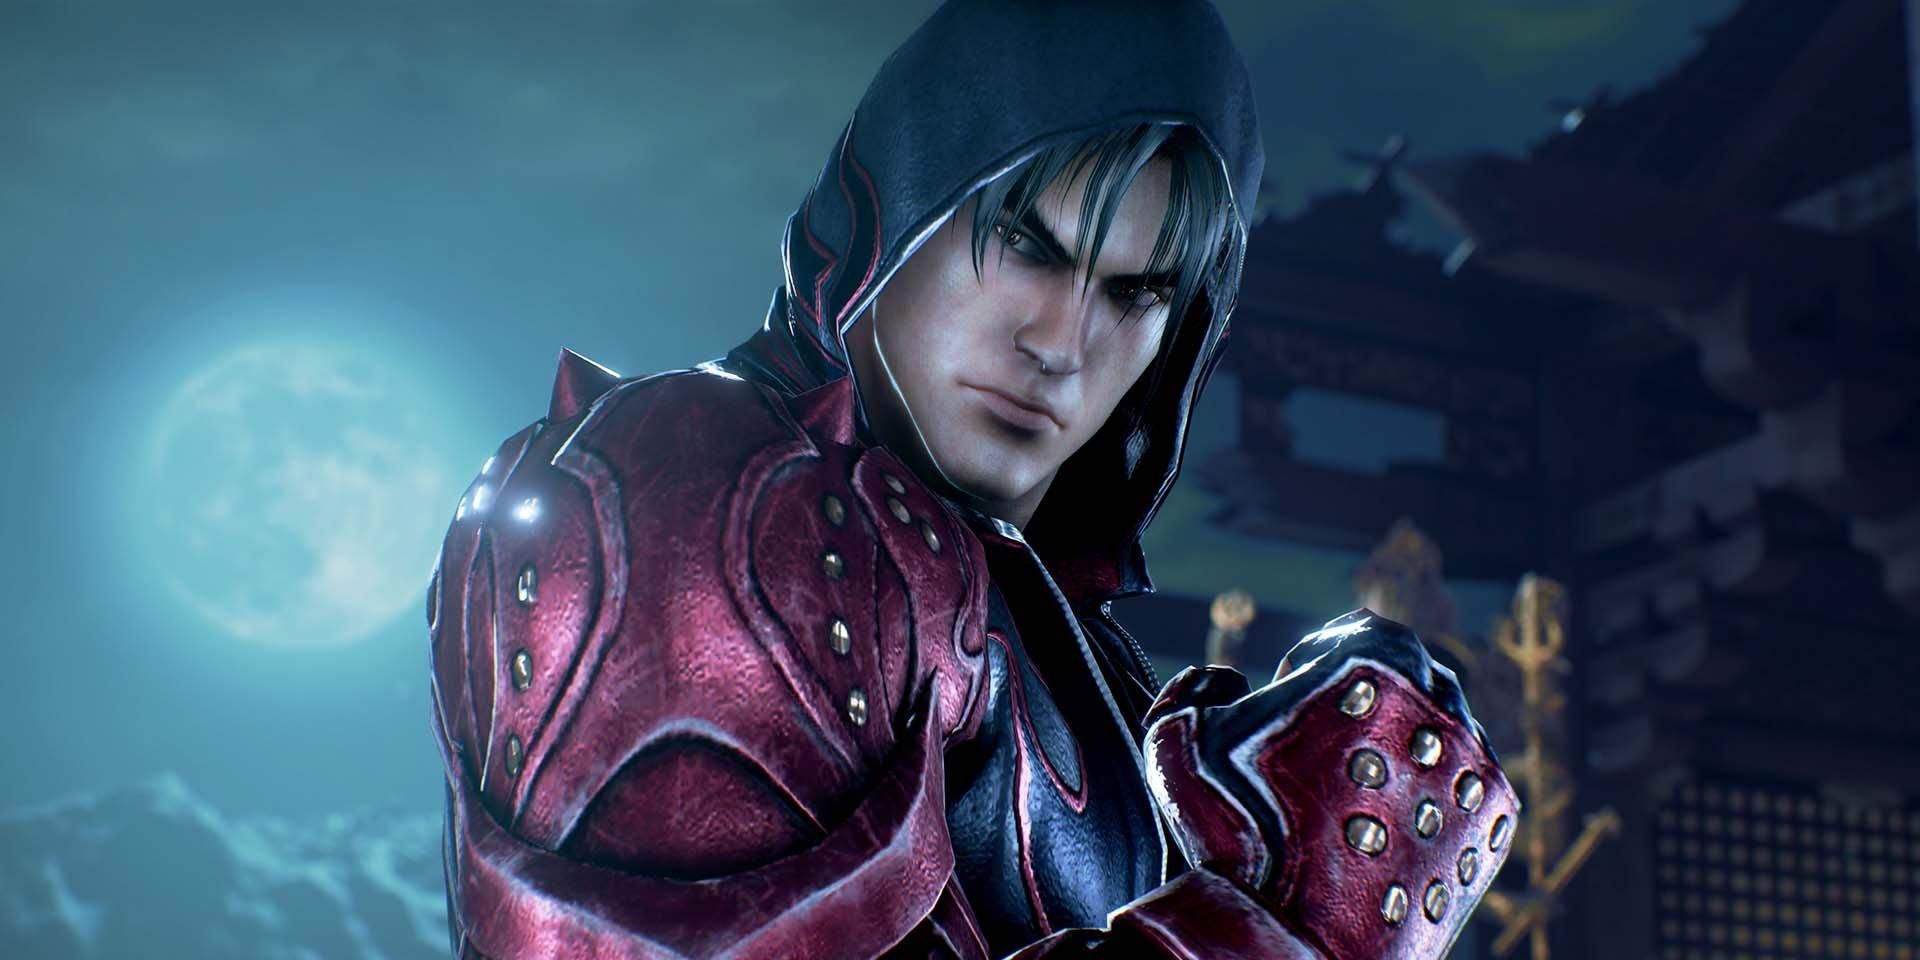 Jin Kazama wearing a hooded outfit and looking back over his shoulder in Tekken 7